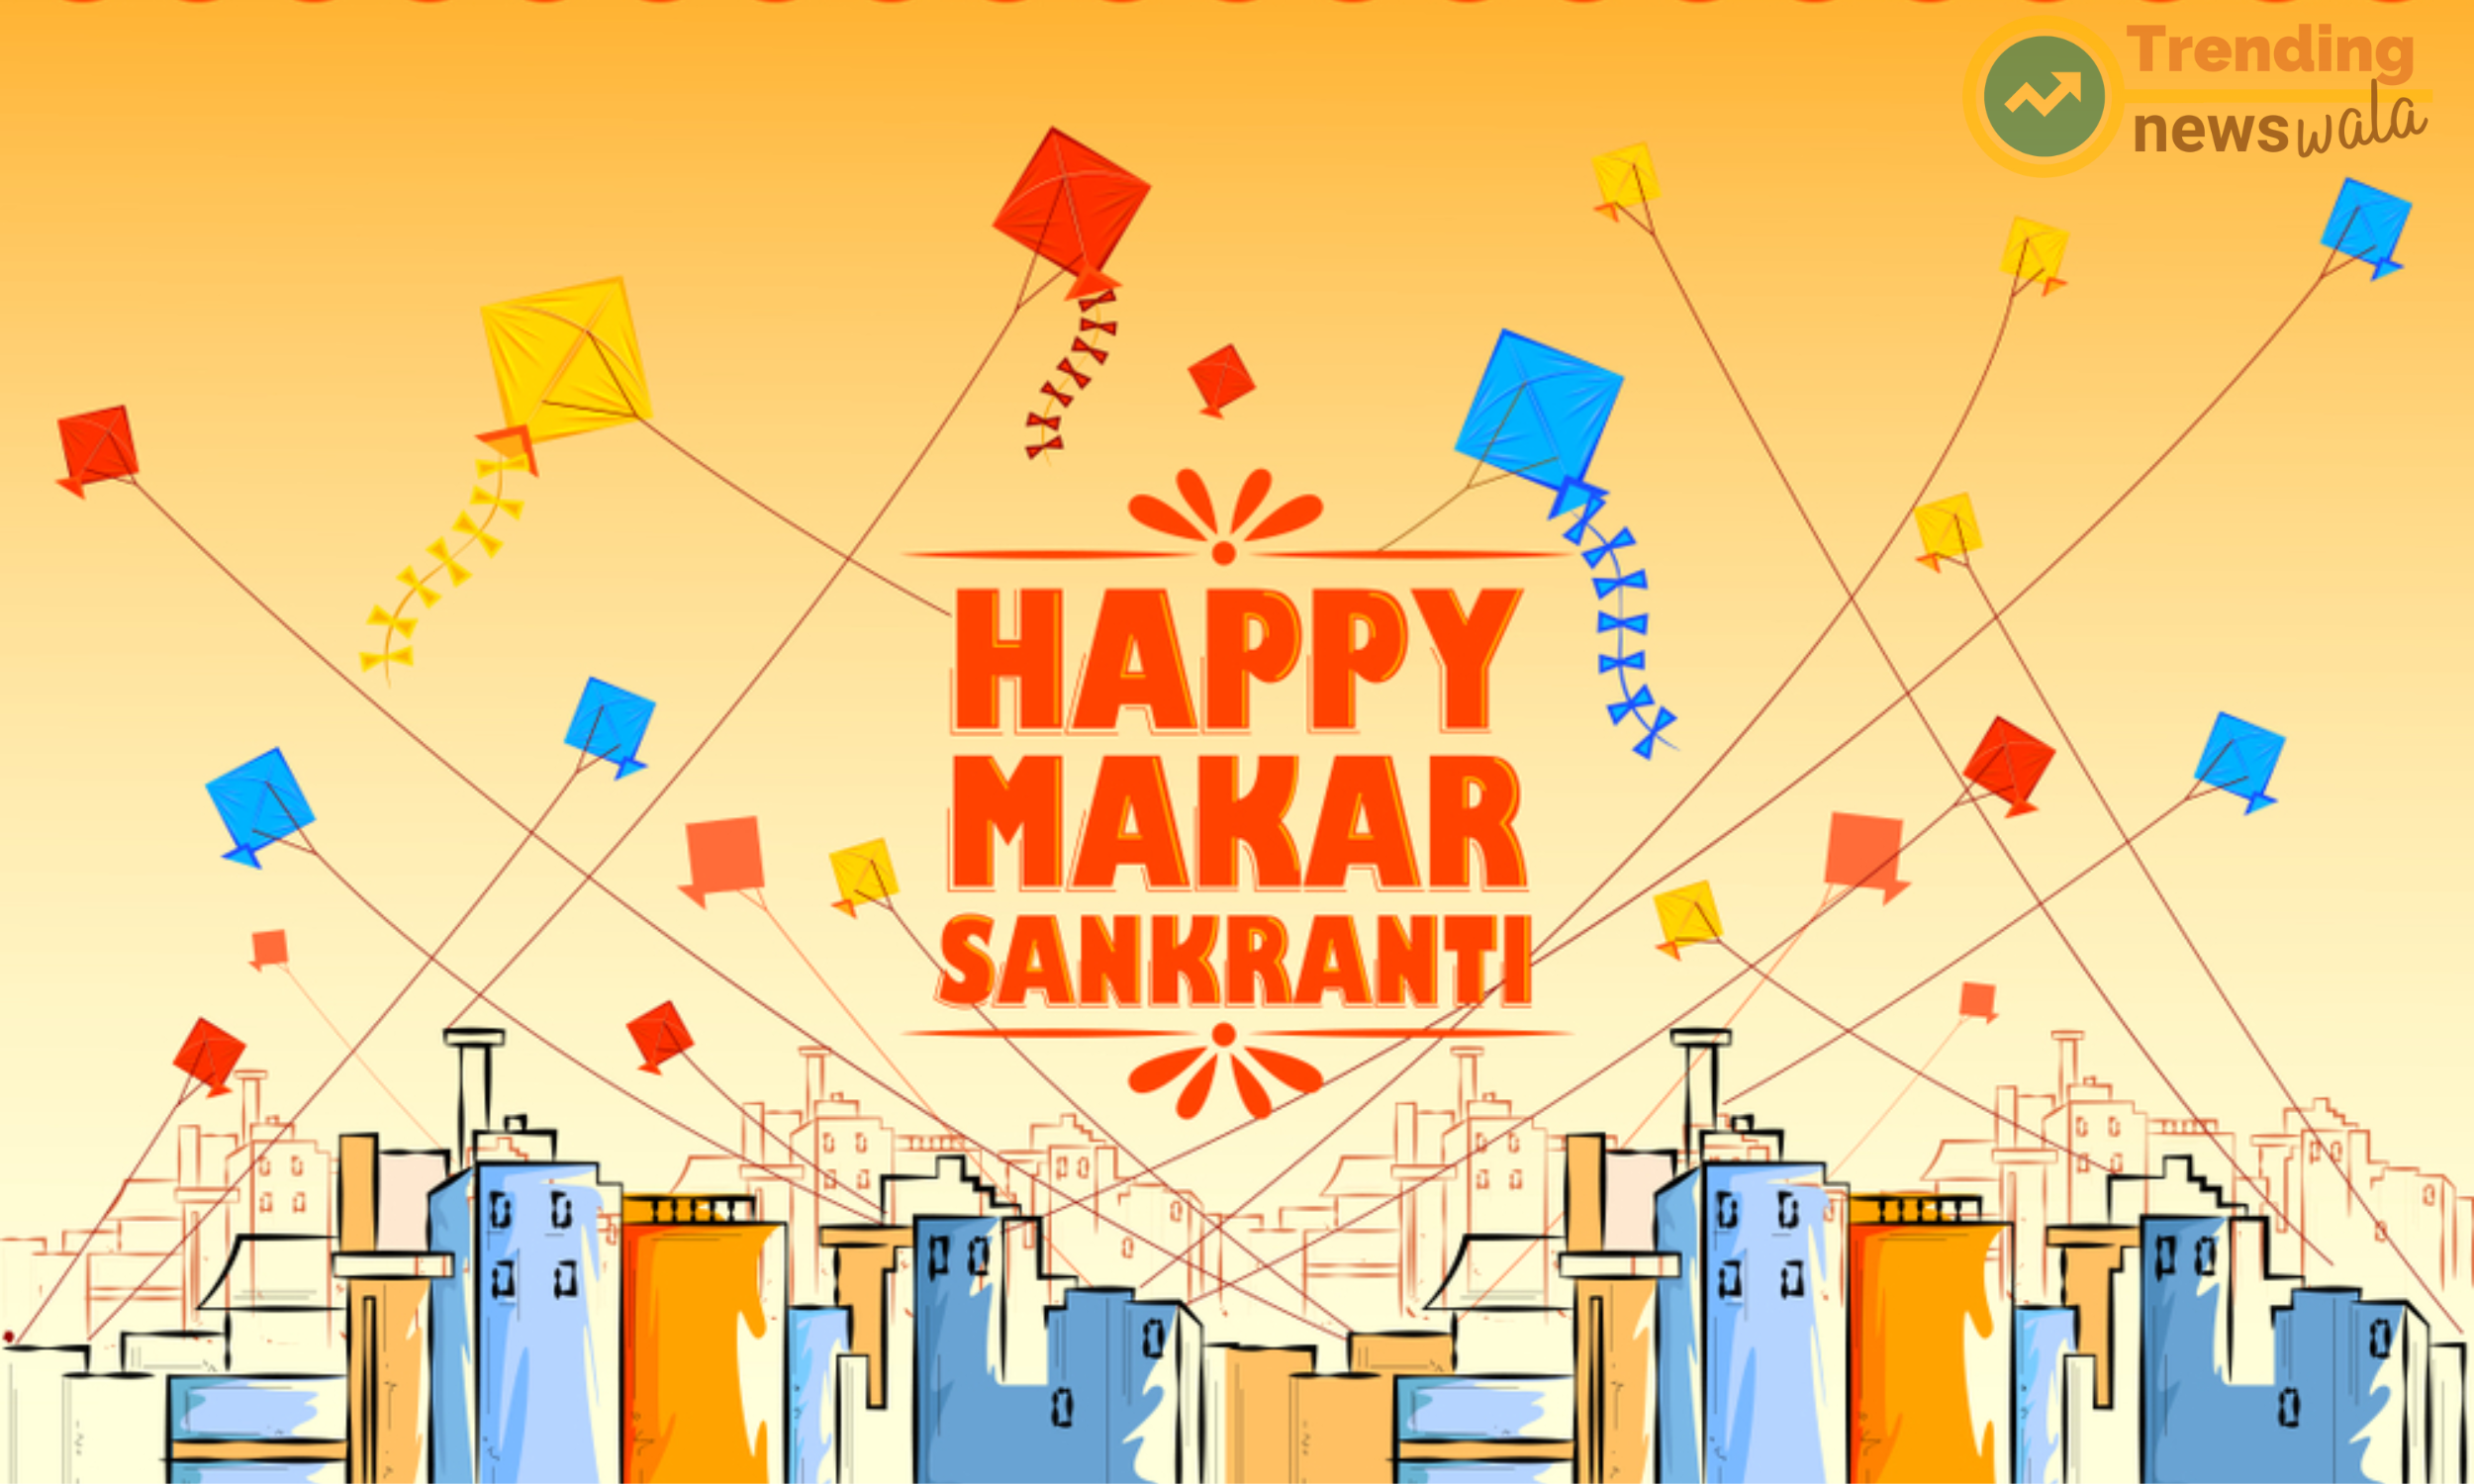 One of the most iconic aspects of Makar Sankranti is kite flying